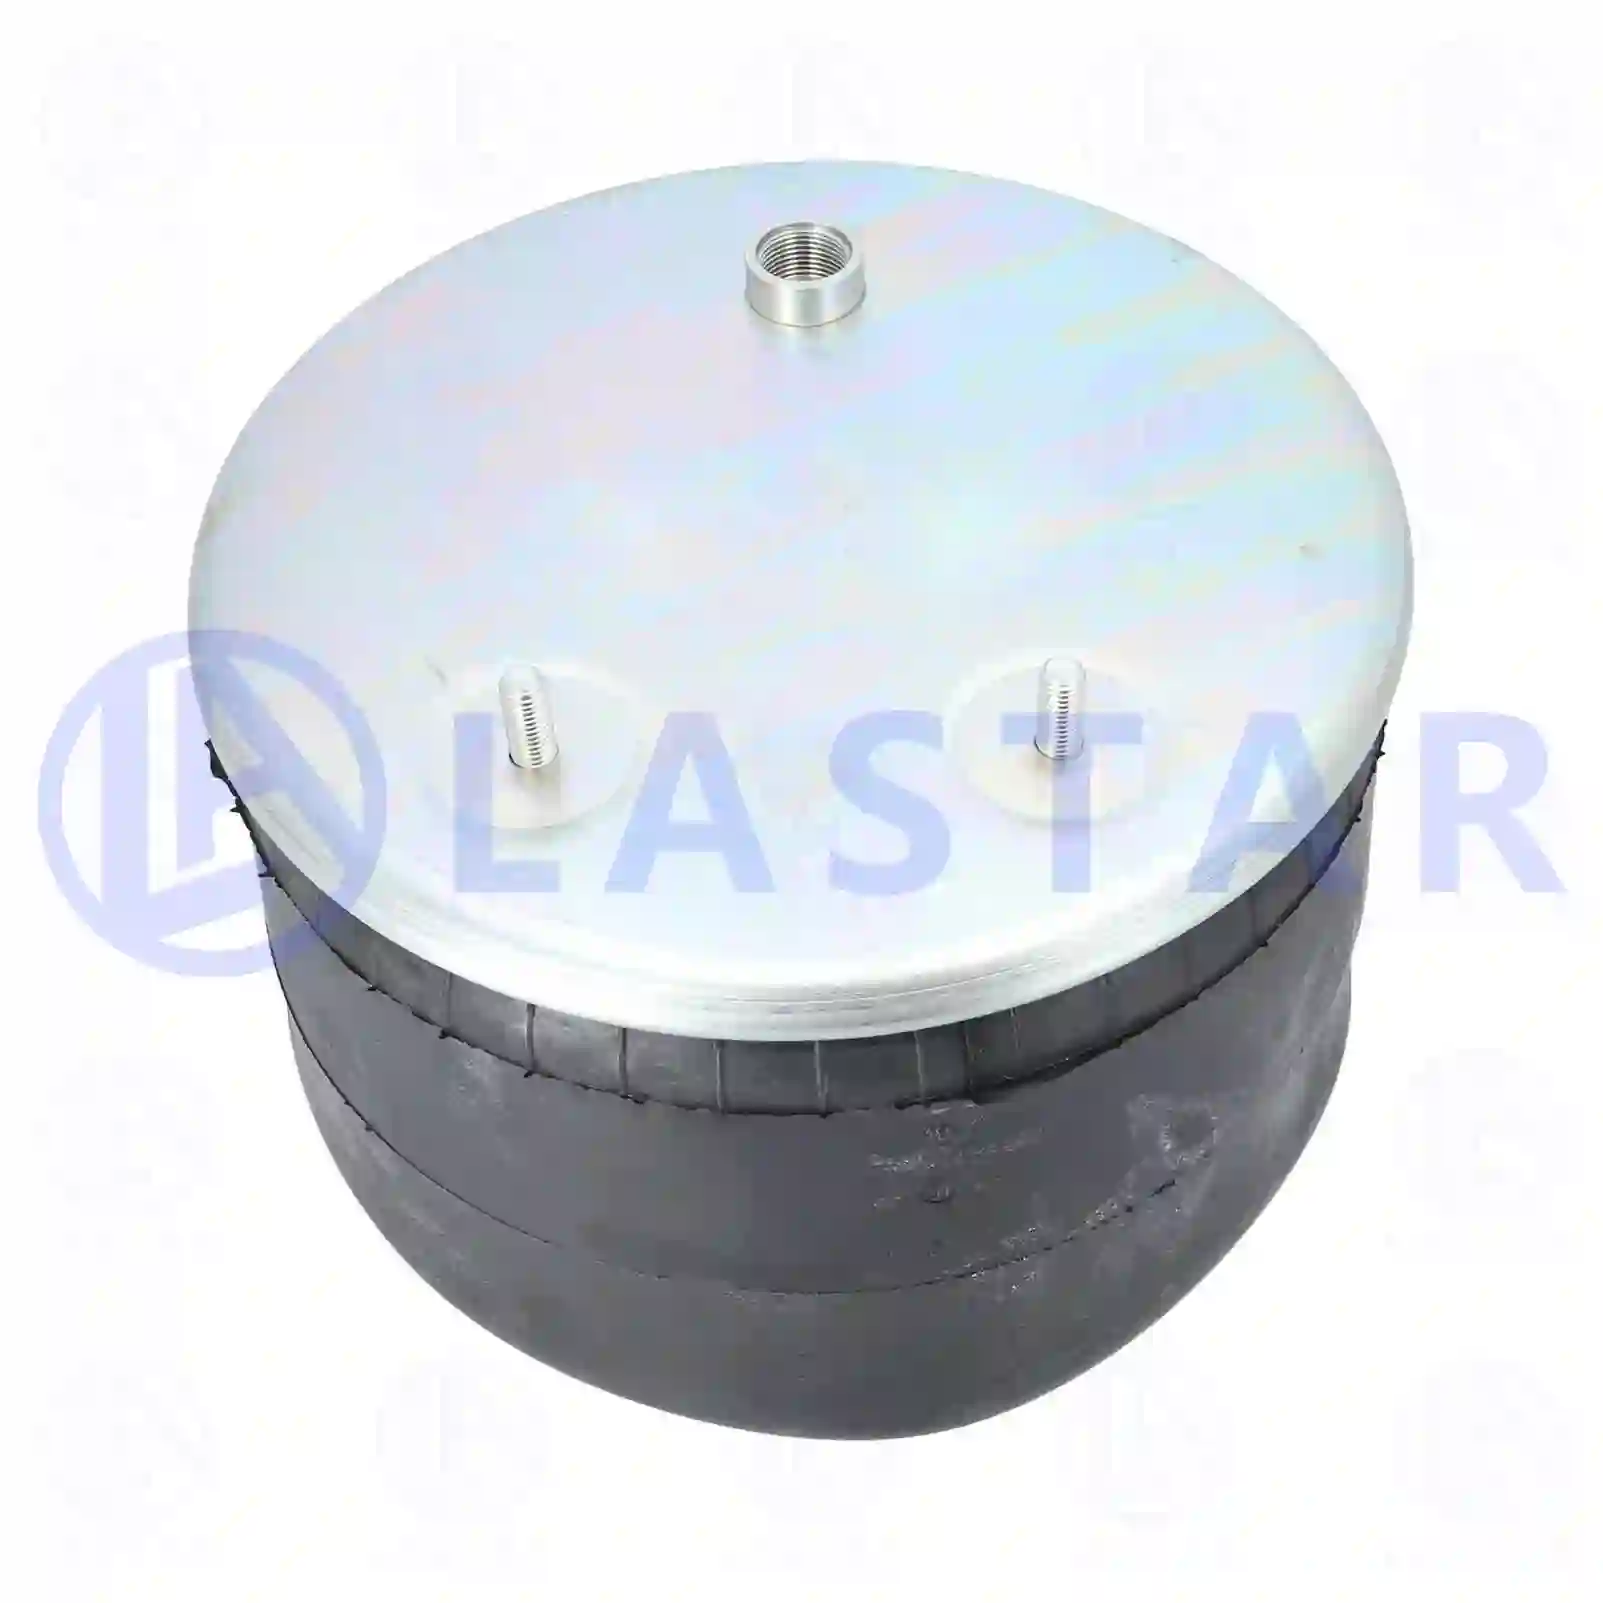 Air spring, with steel piston, 77727197, 1883826, , , , , , ||  77727197 Lastar Spare Part | Truck Spare Parts, Auotomotive Spare Parts Air spring, with steel piston, 77727197, 1883826, , , , , , ||  77727197 Lastar Spare Part | Truck Spare Parts, Auotomotive Spare Parts